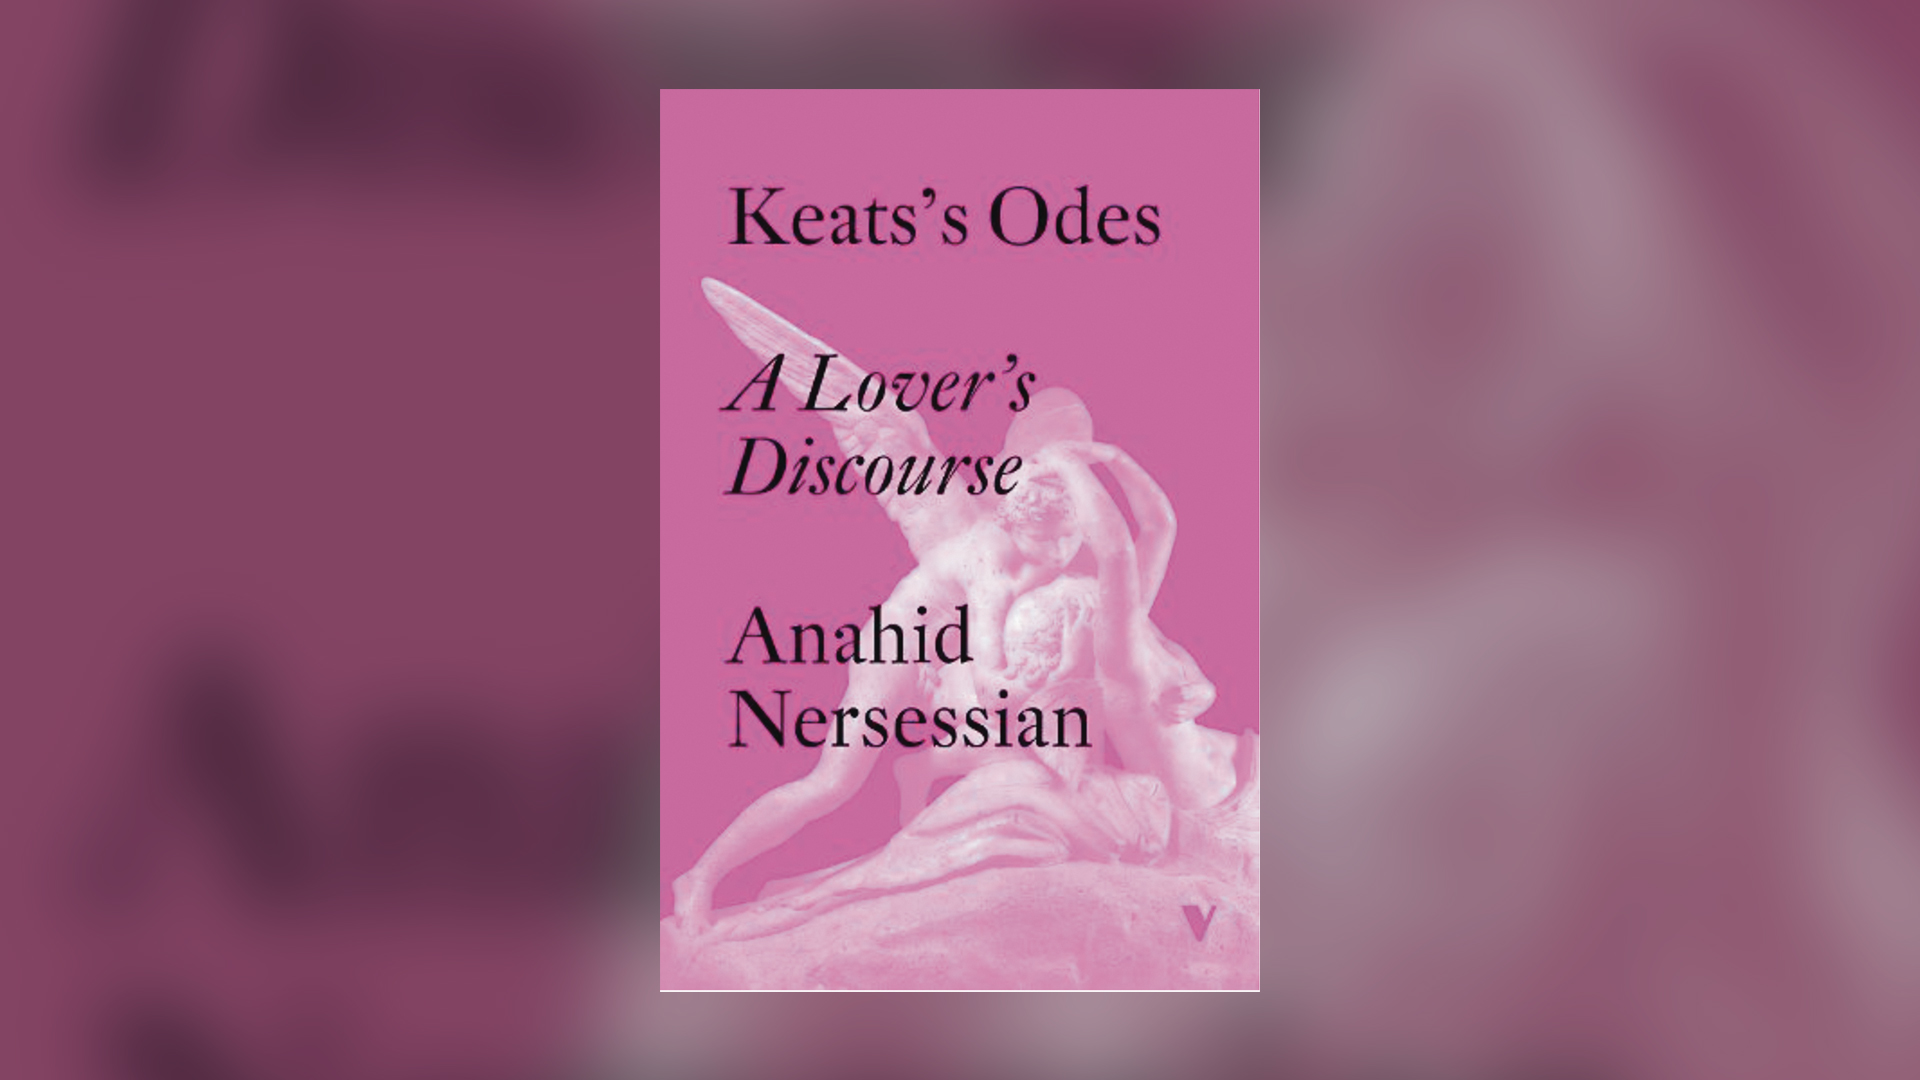 Keats’s Odes: A Lover’s Discourse book cover